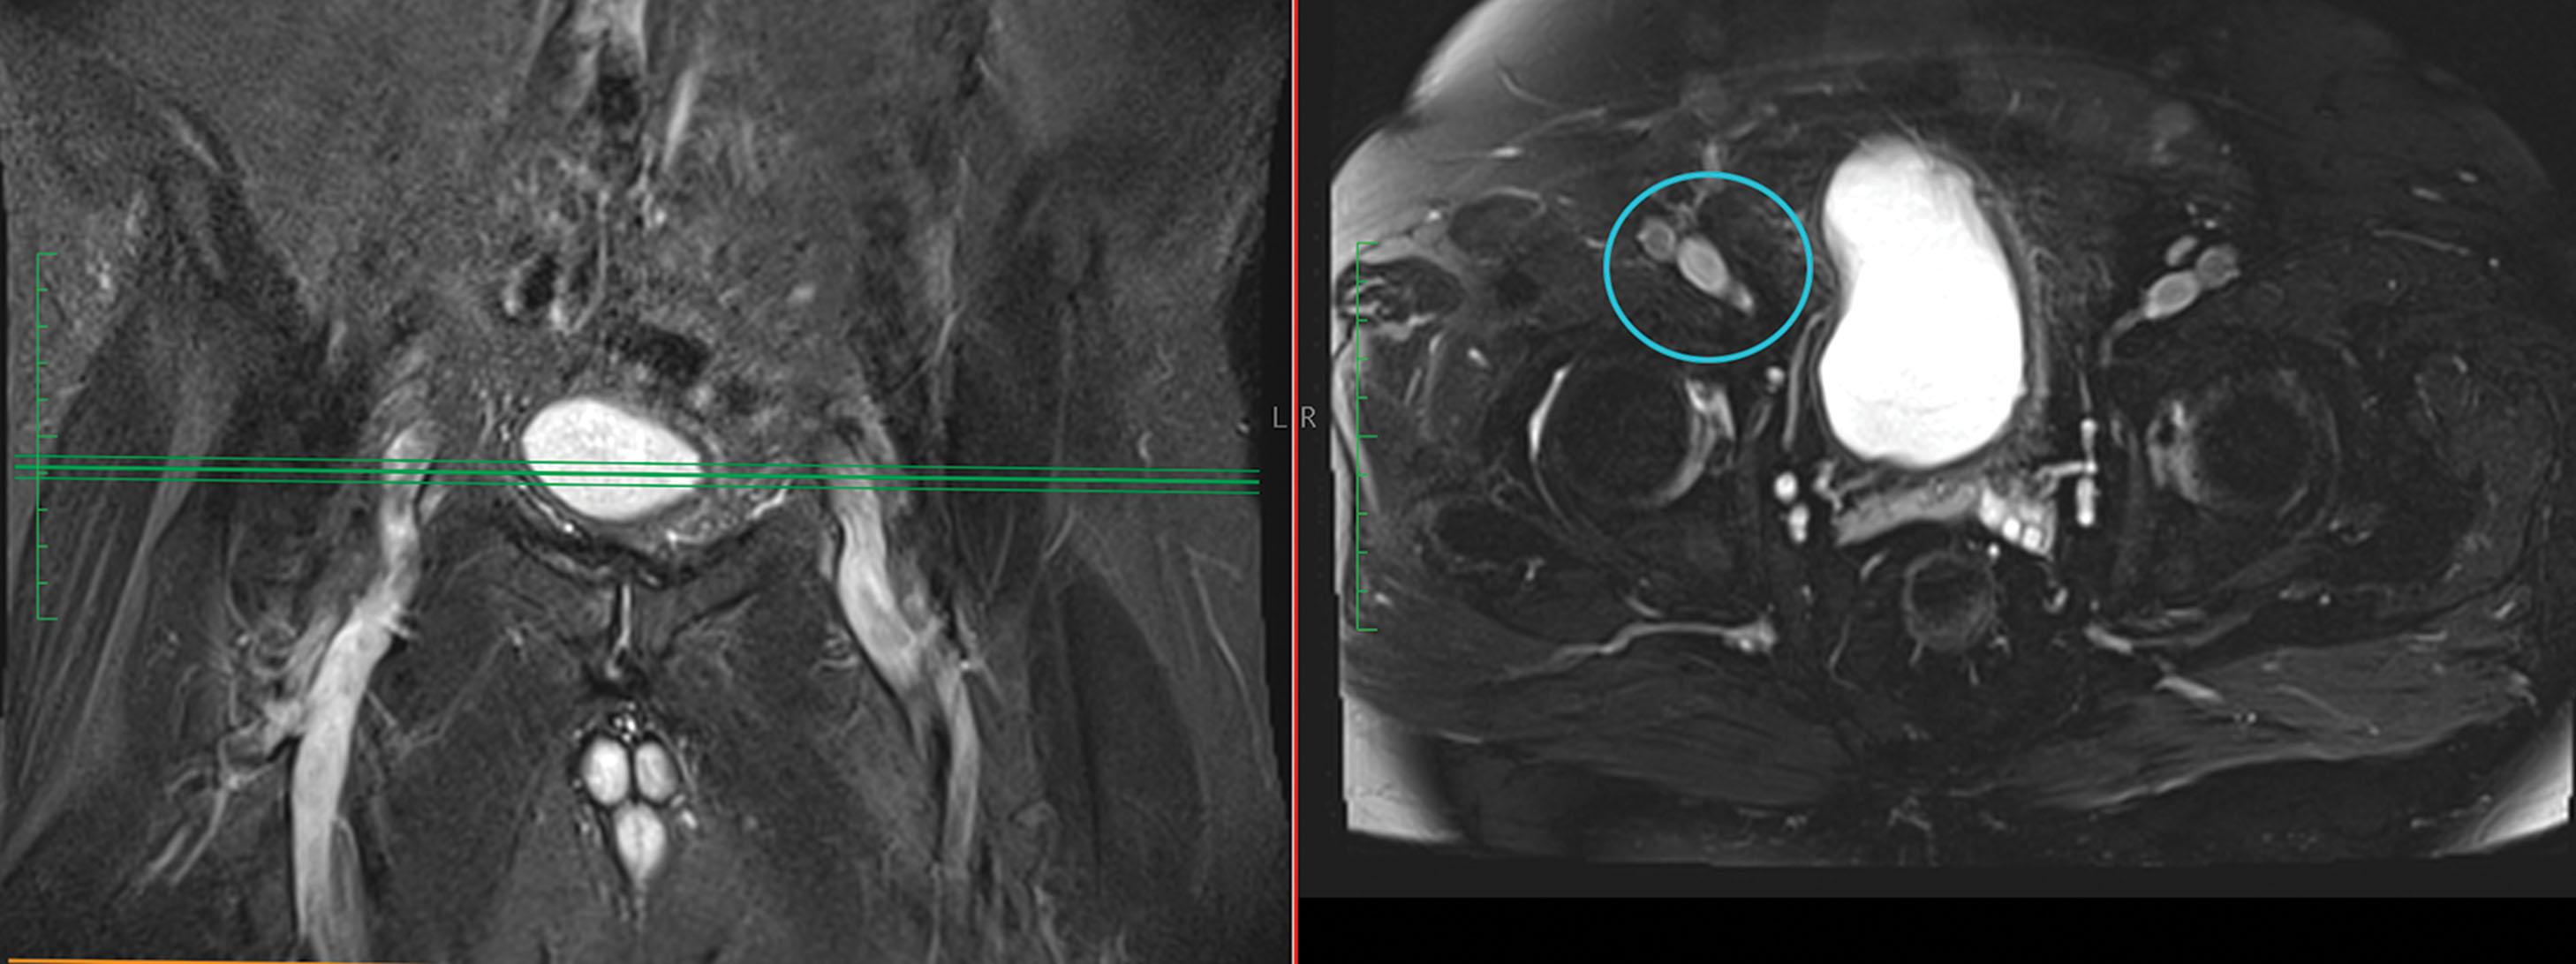 Figure 24.7, Magnetic resonance imaging showing the coronal and axial views of the femoral nerve. The “vein, artery, nerve” configuration is seen clearly in the circled portion of the image.